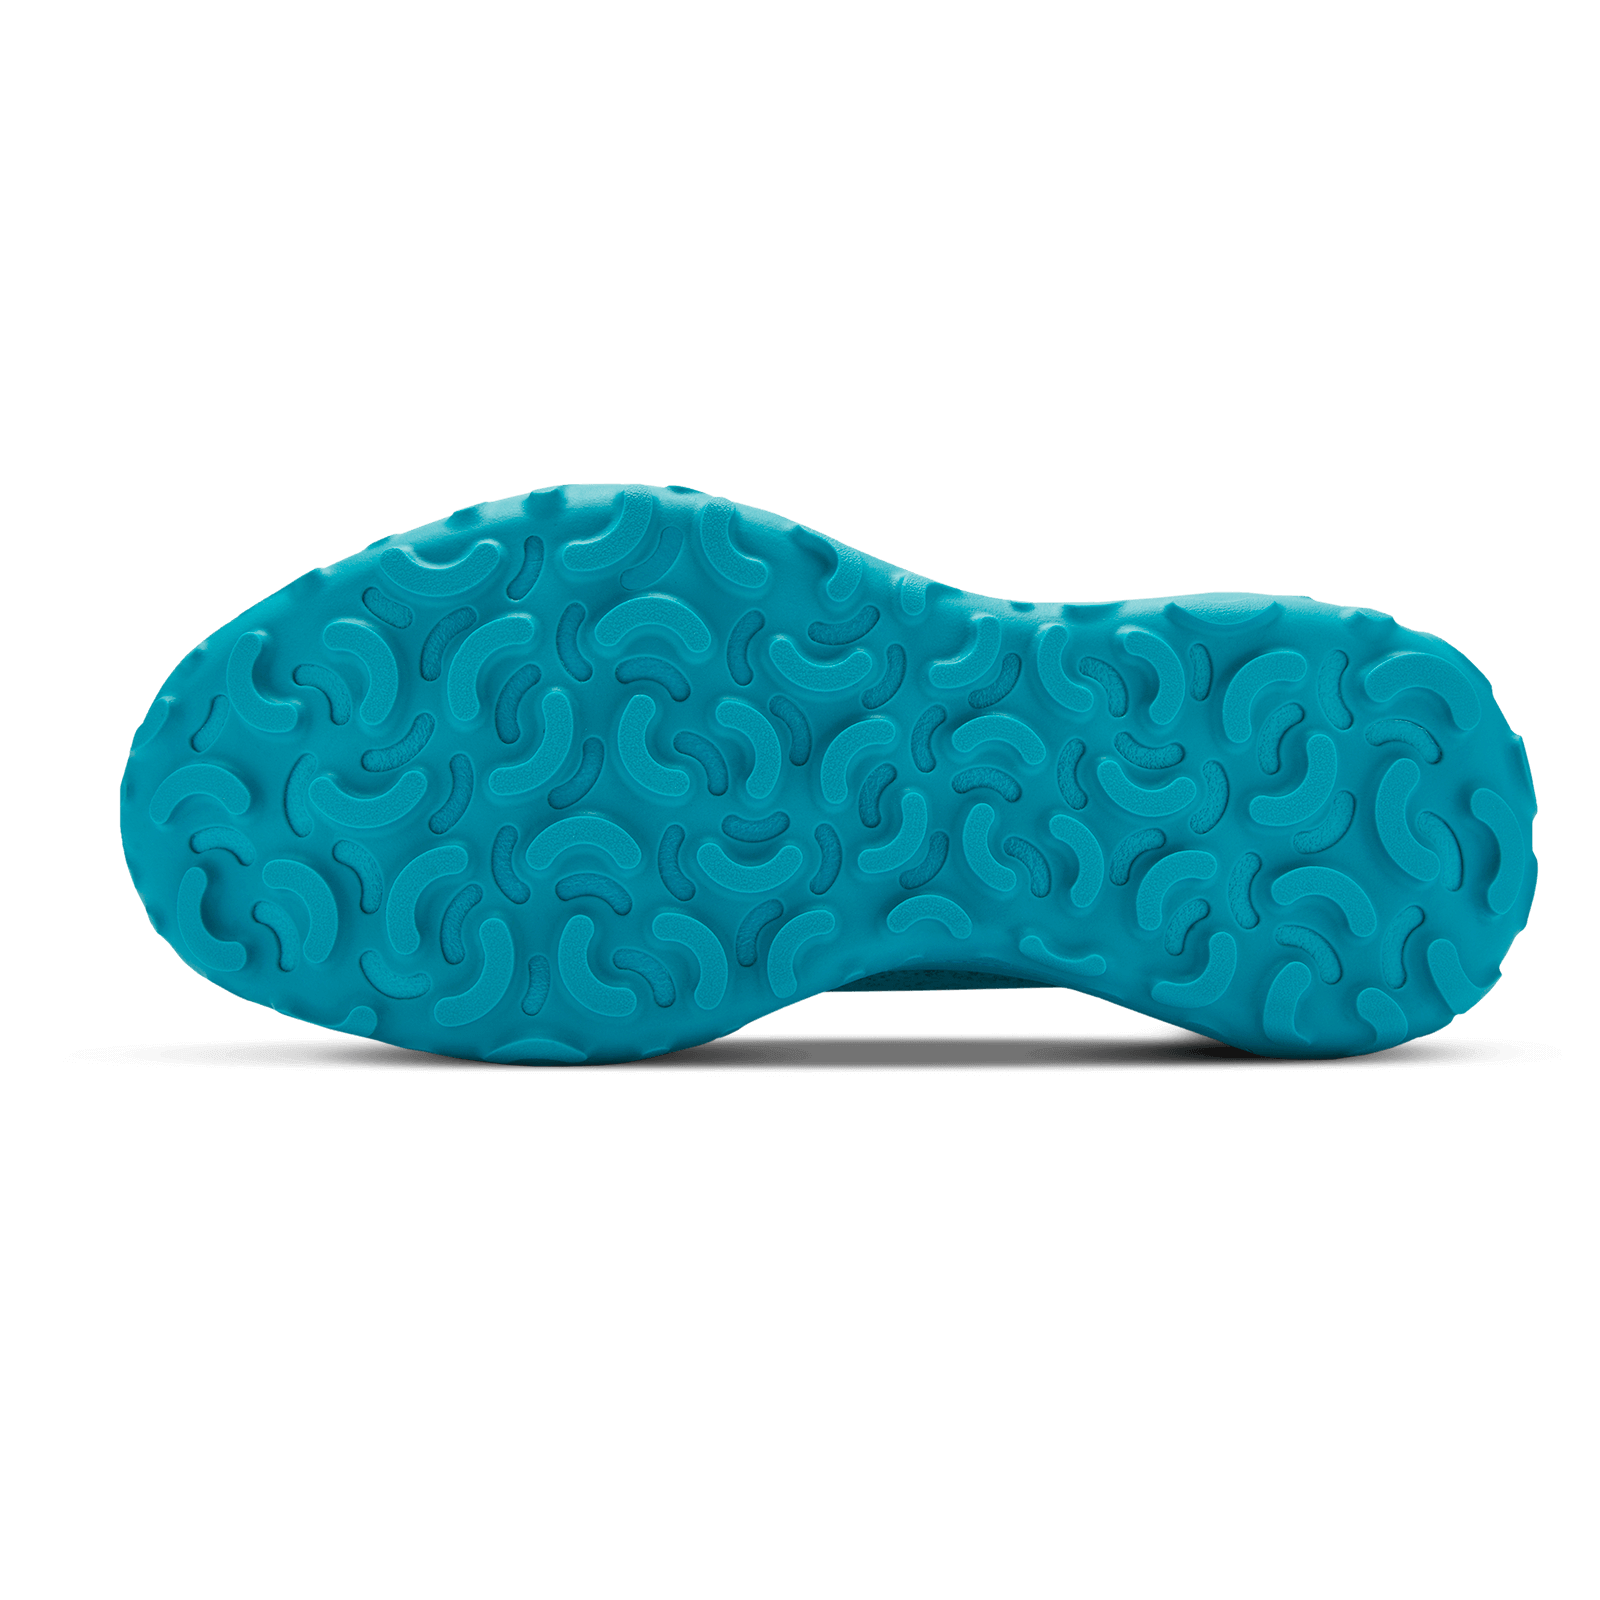 Men's Trail Runner SWT Mizzles - Thrive Teal (Thrive Teal Sole)